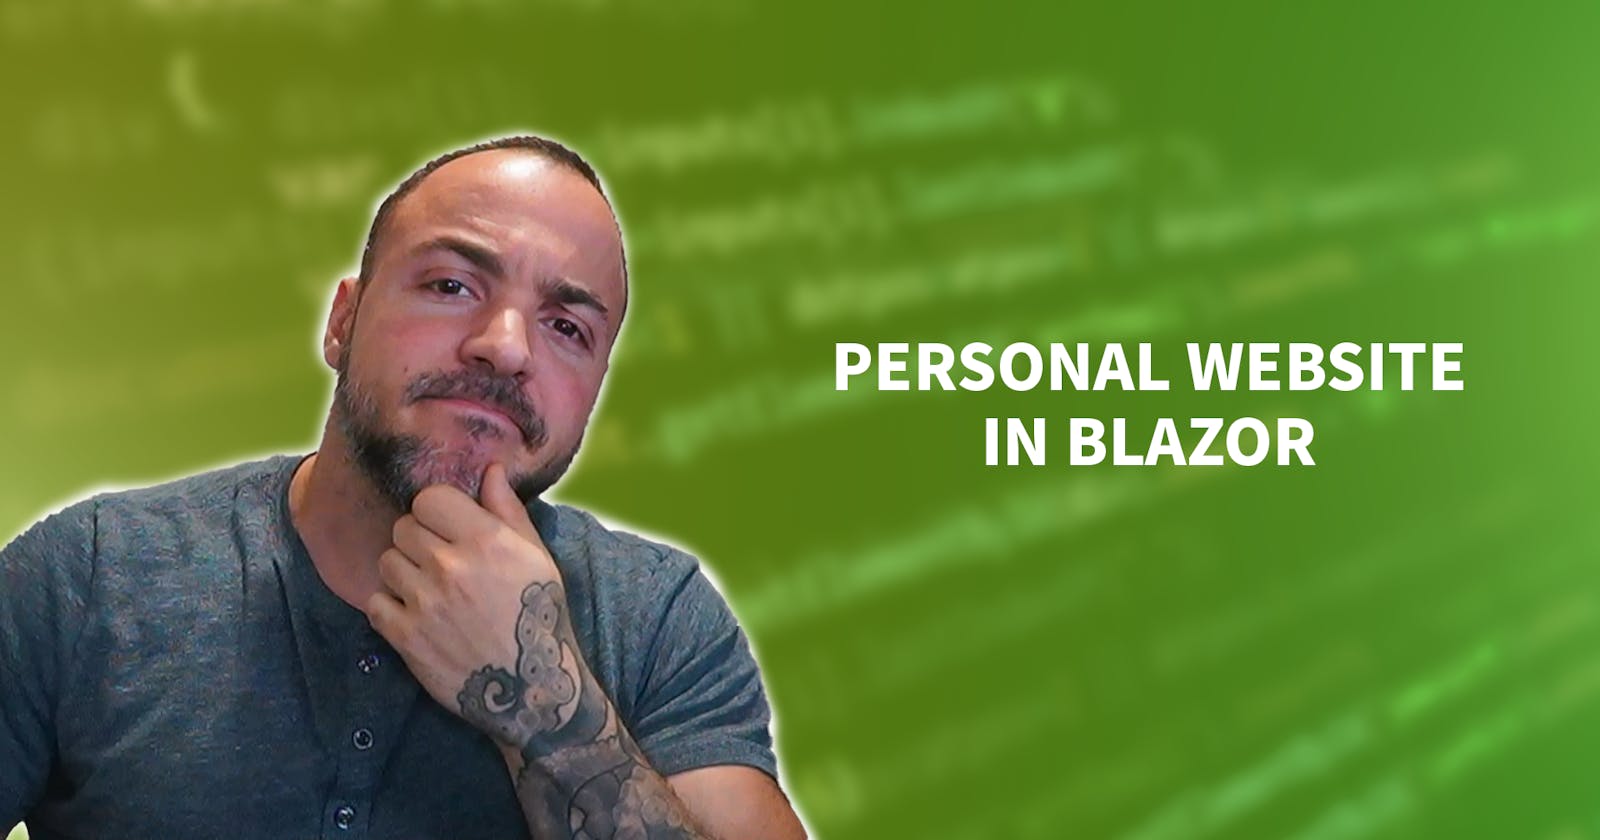 How To Build A Personal Website In Blazor: An ASP.NET Core Tutorial